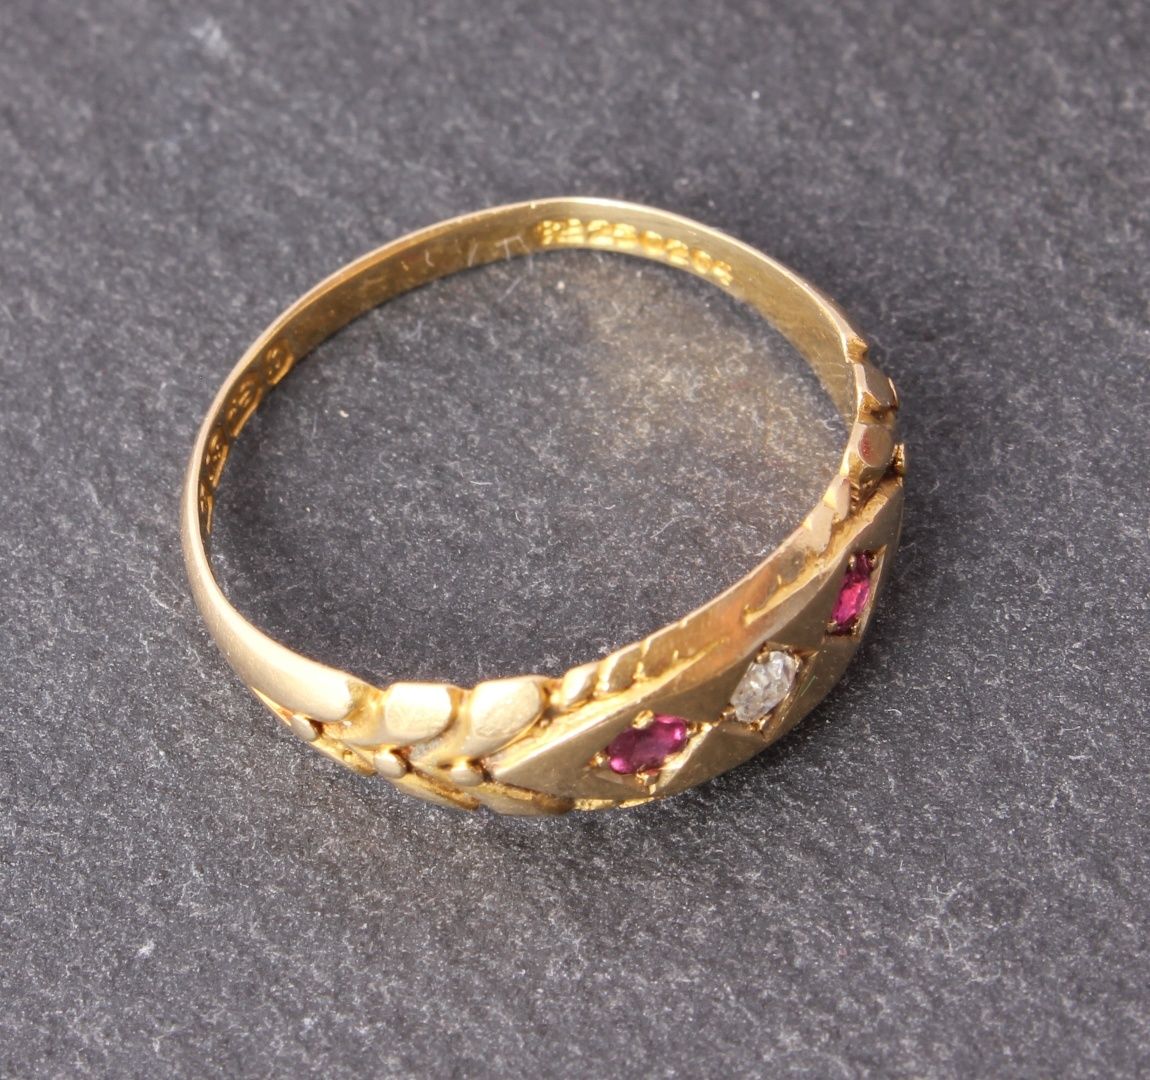 Antique Victorian 18ct Gold, Diamond & Ruby Gypsy Ring. 1895. Size N.